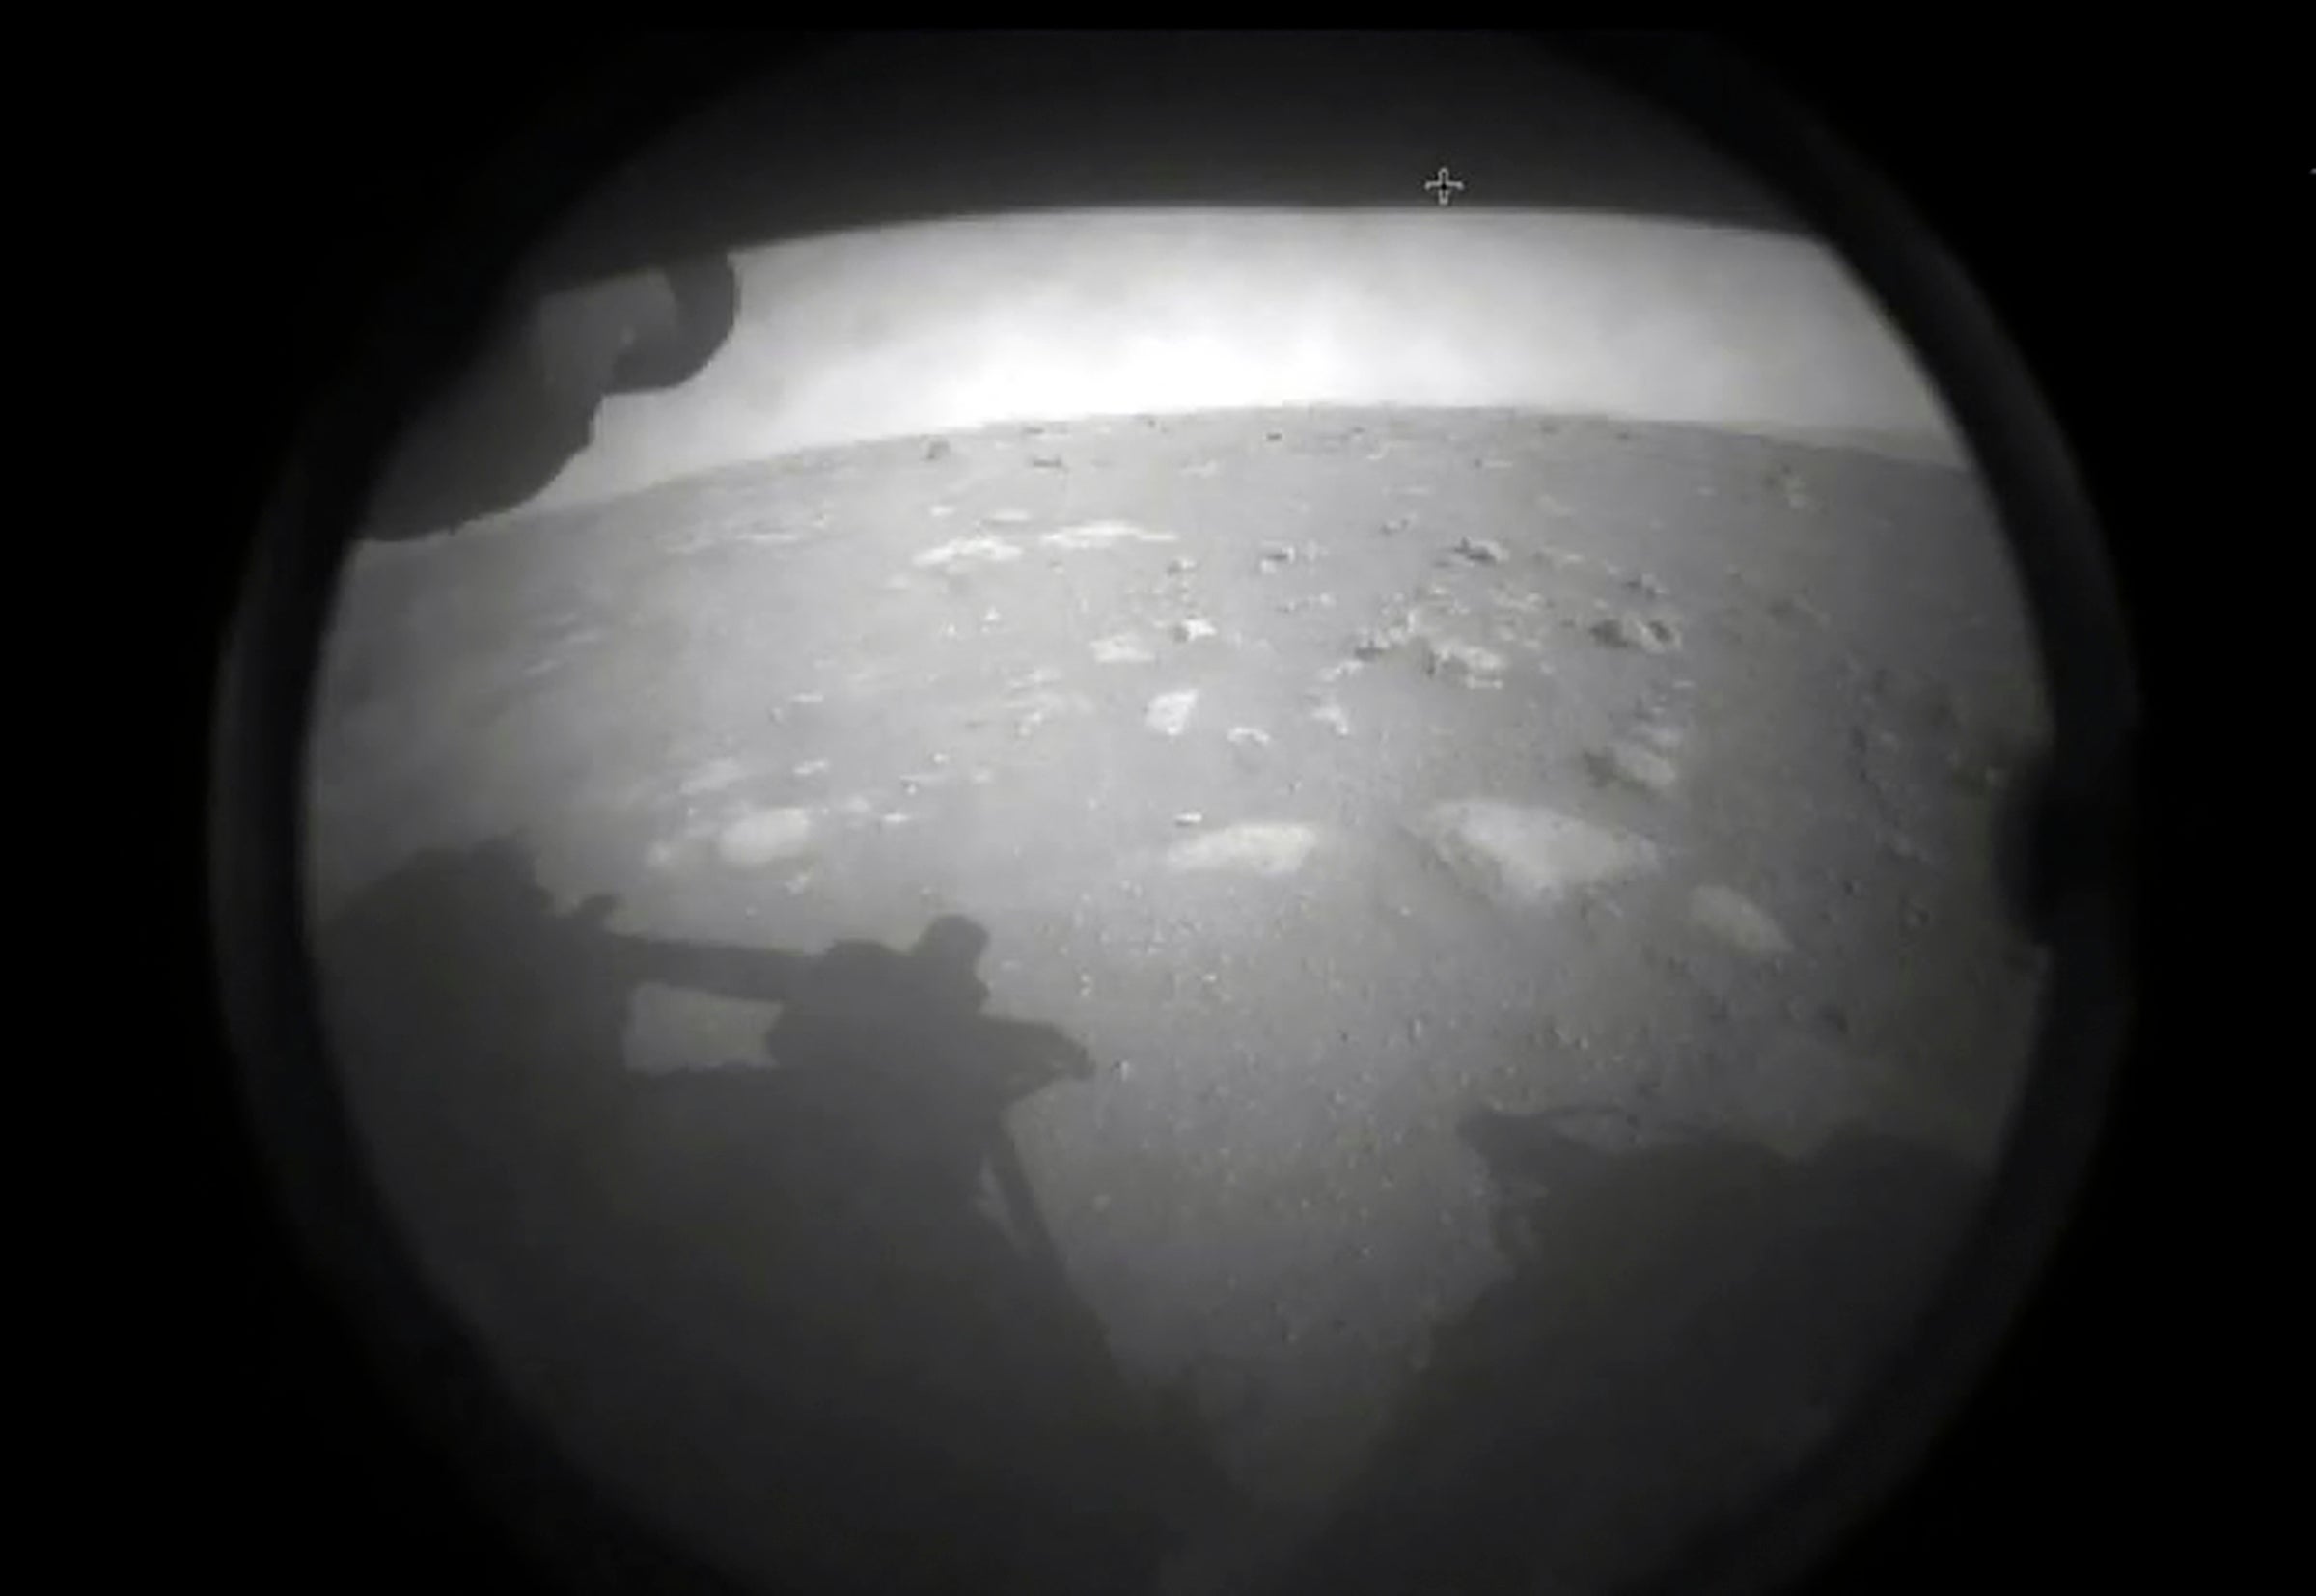 Images from Nasa’s Perseverance rover as it landed on the surface of Mars